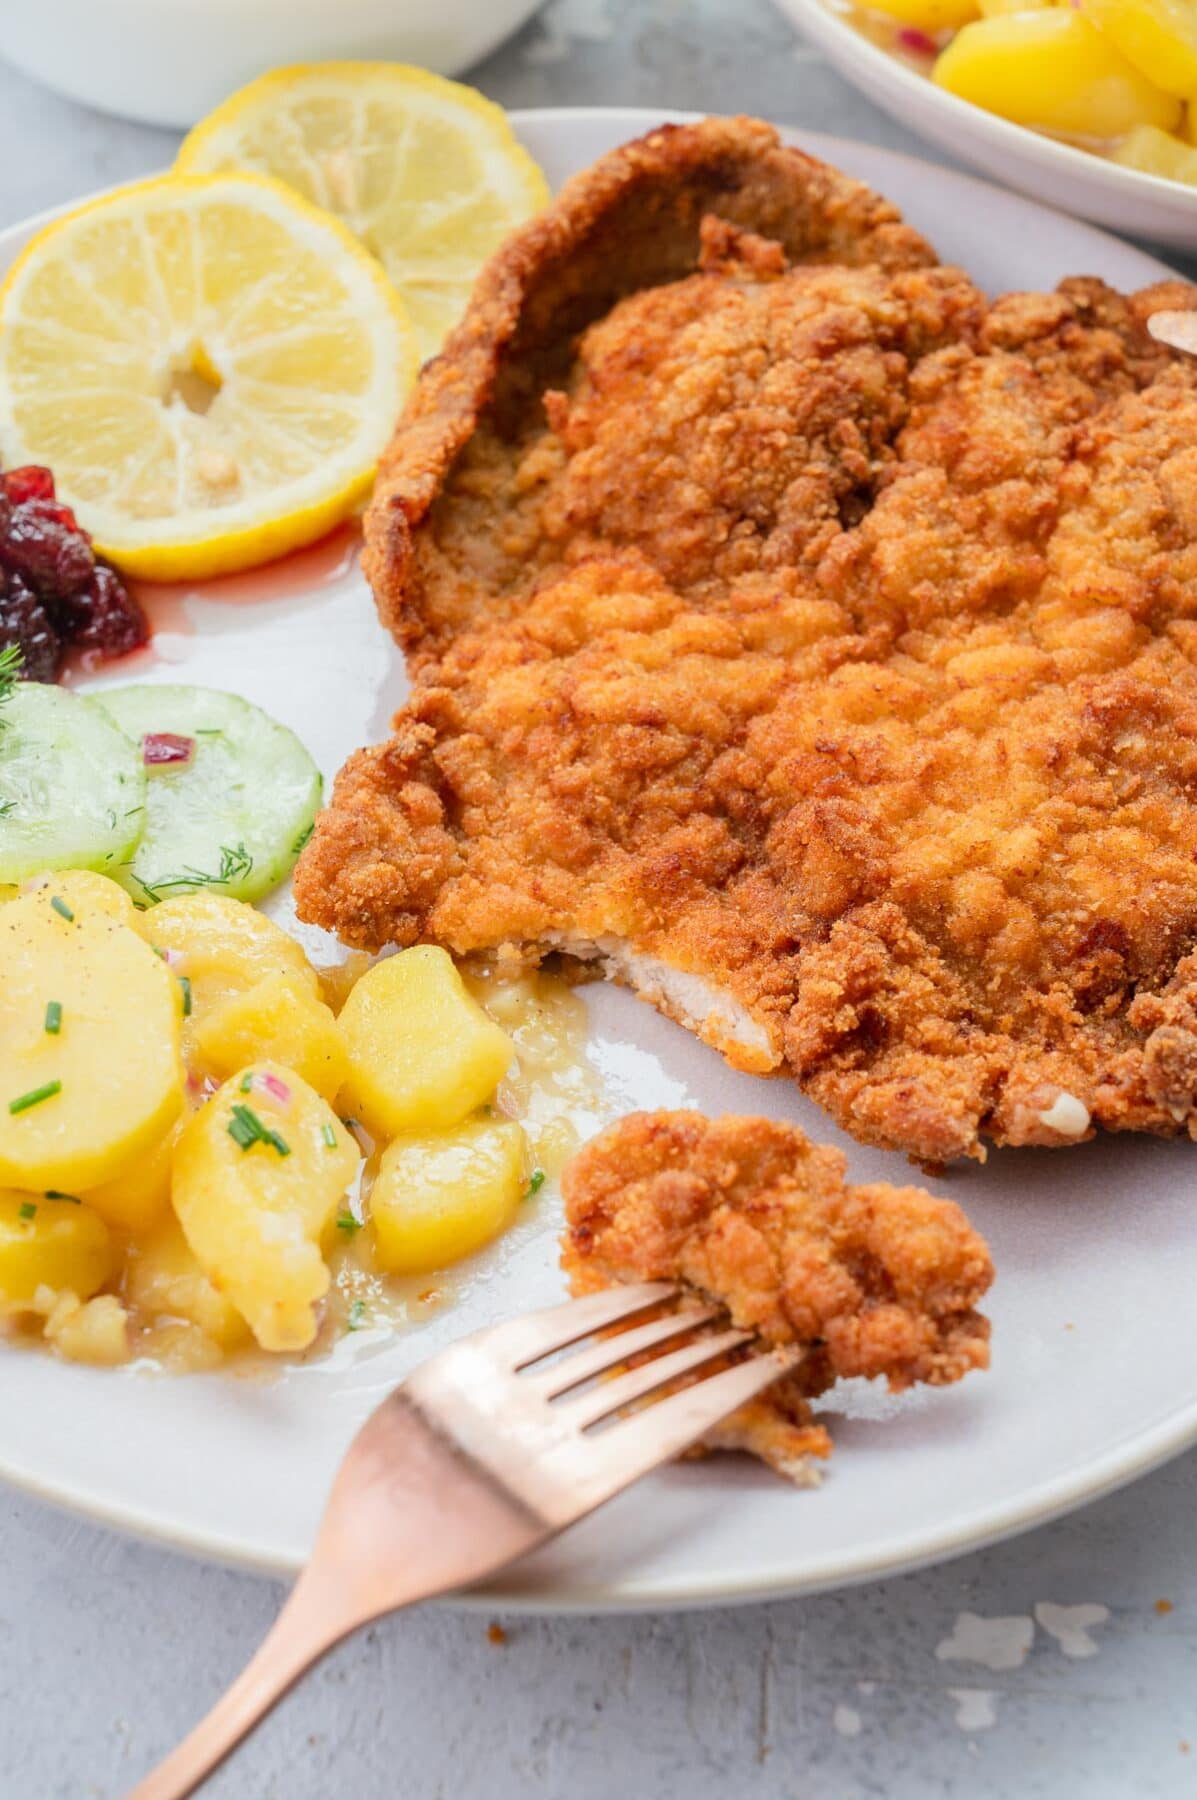 Wiener Schnitzel on a beige plate with lemon slices, potato and cucumber salad.